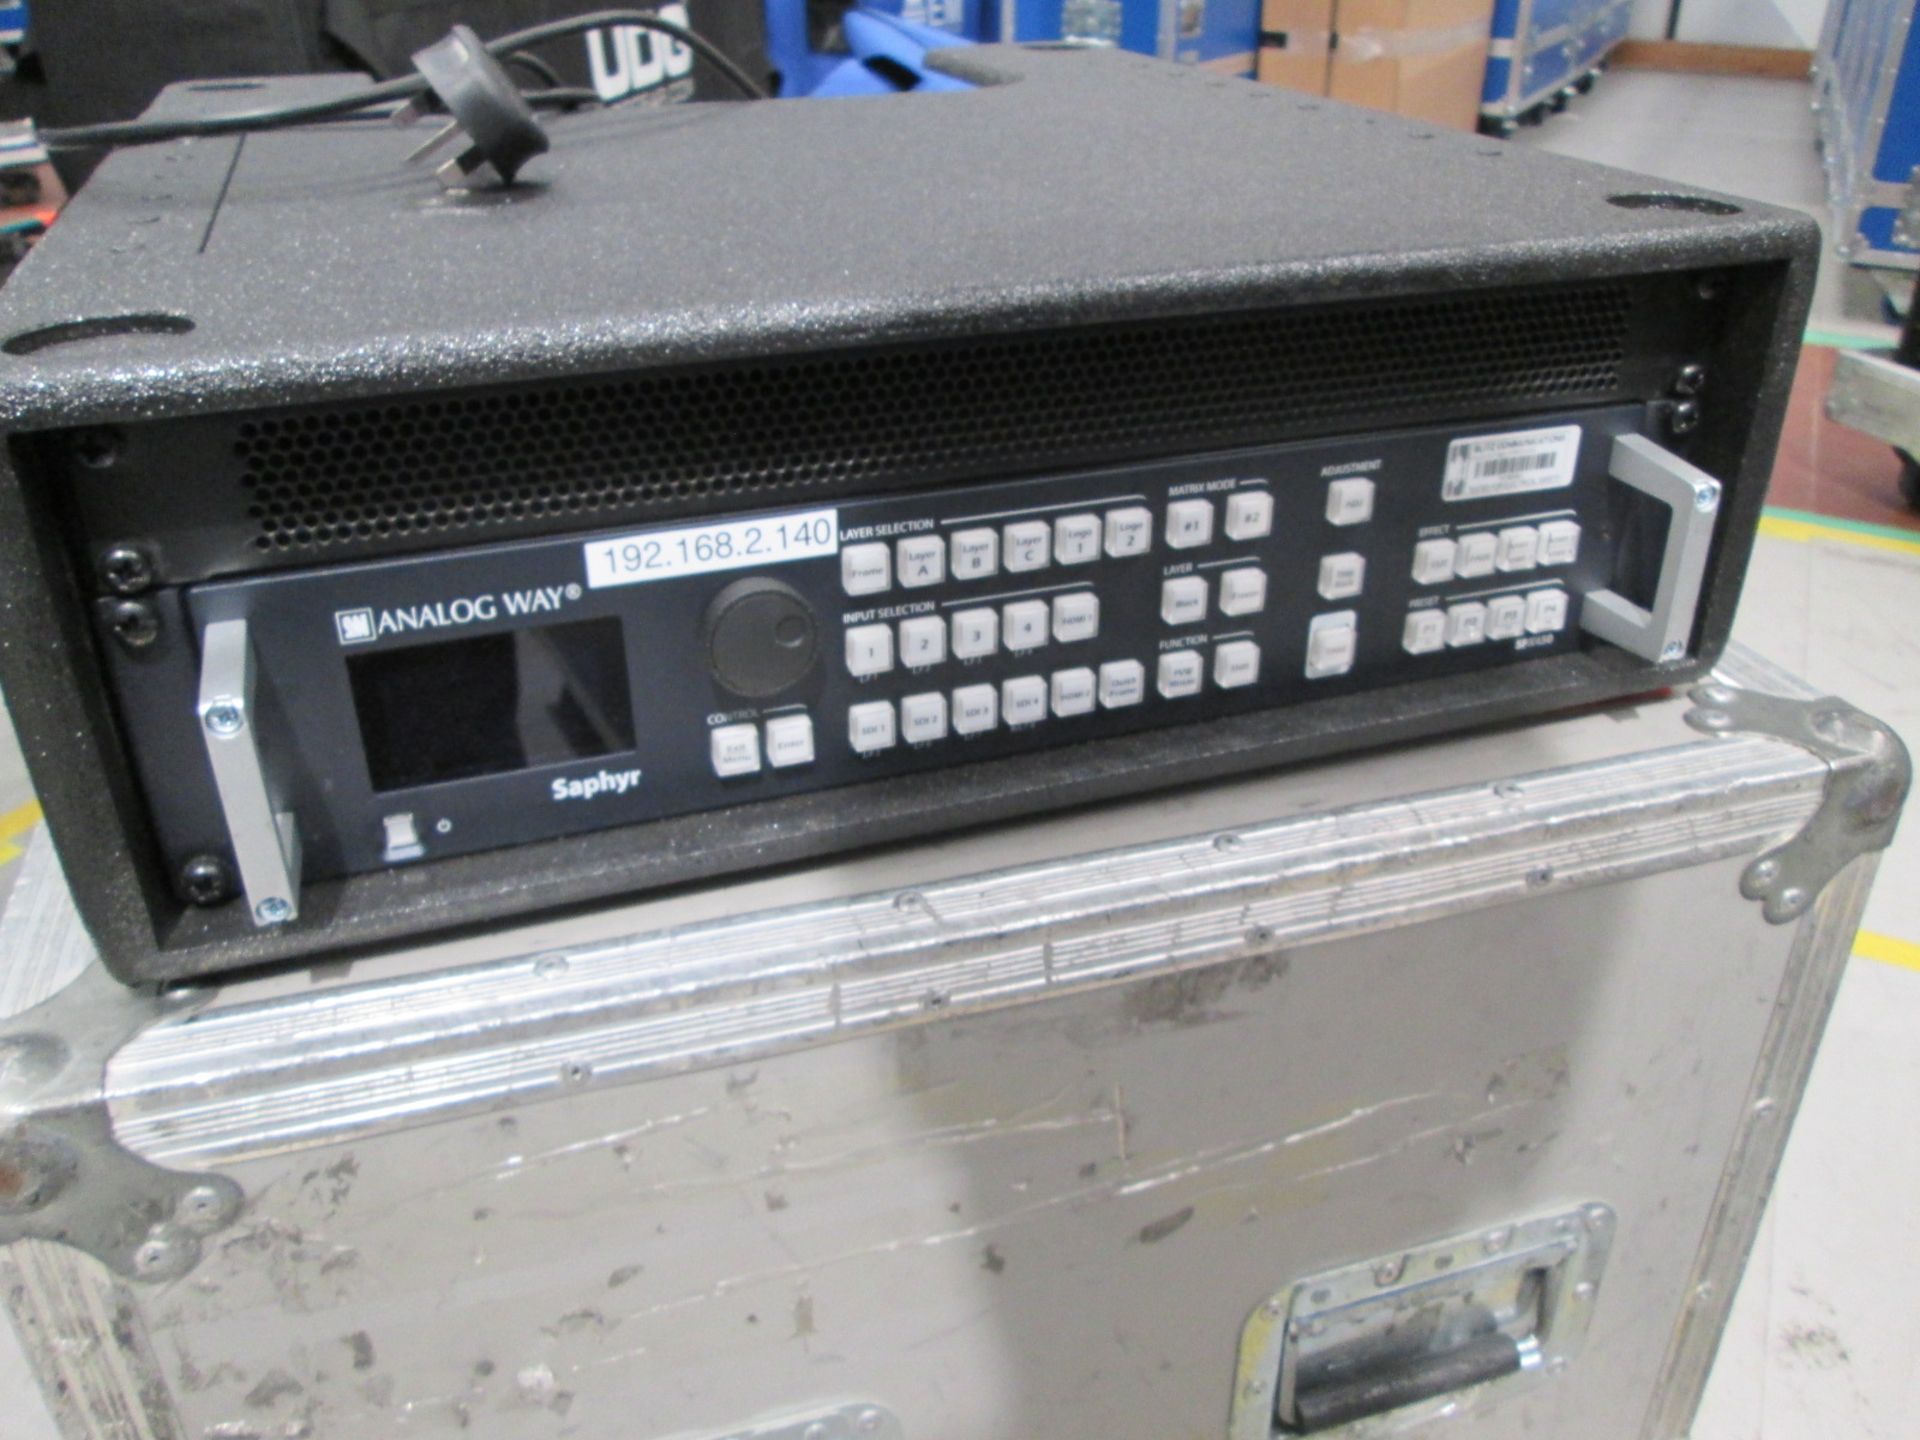 Analog Way Saphyr SPX450 Switcher with 2 x Dell 24" monitors and Netgear 24 port gigabit switch.